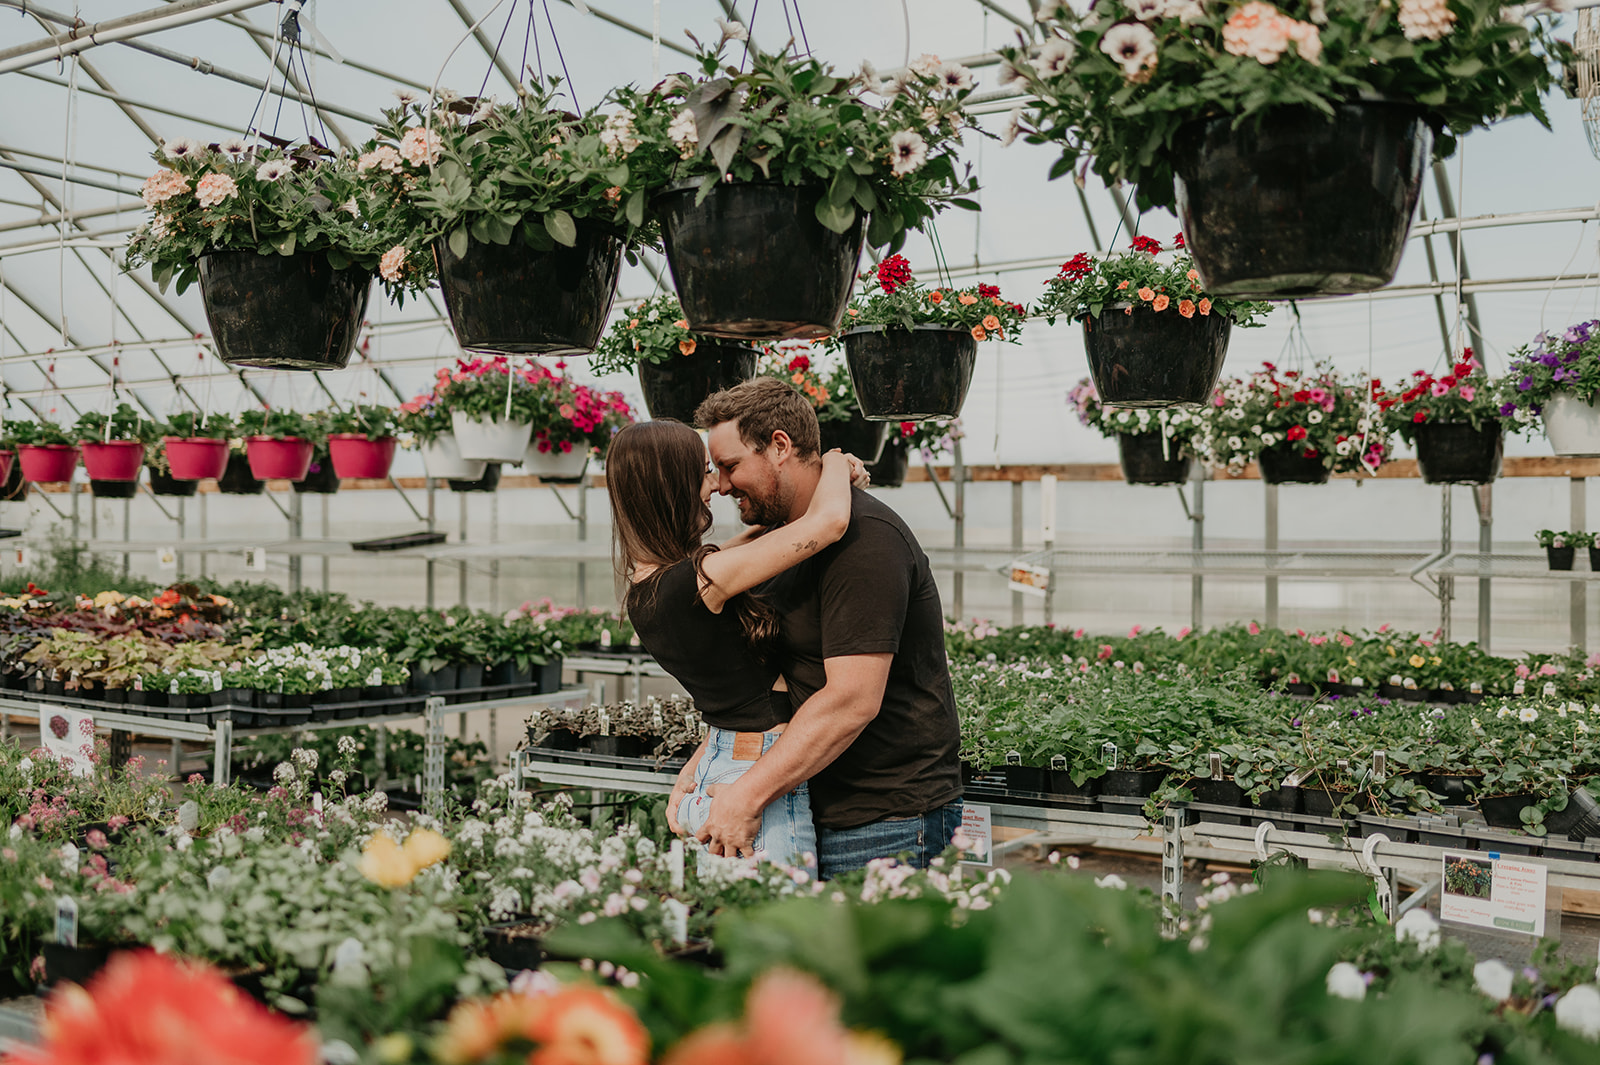 A couple embraces during their greenhouse engagement session.